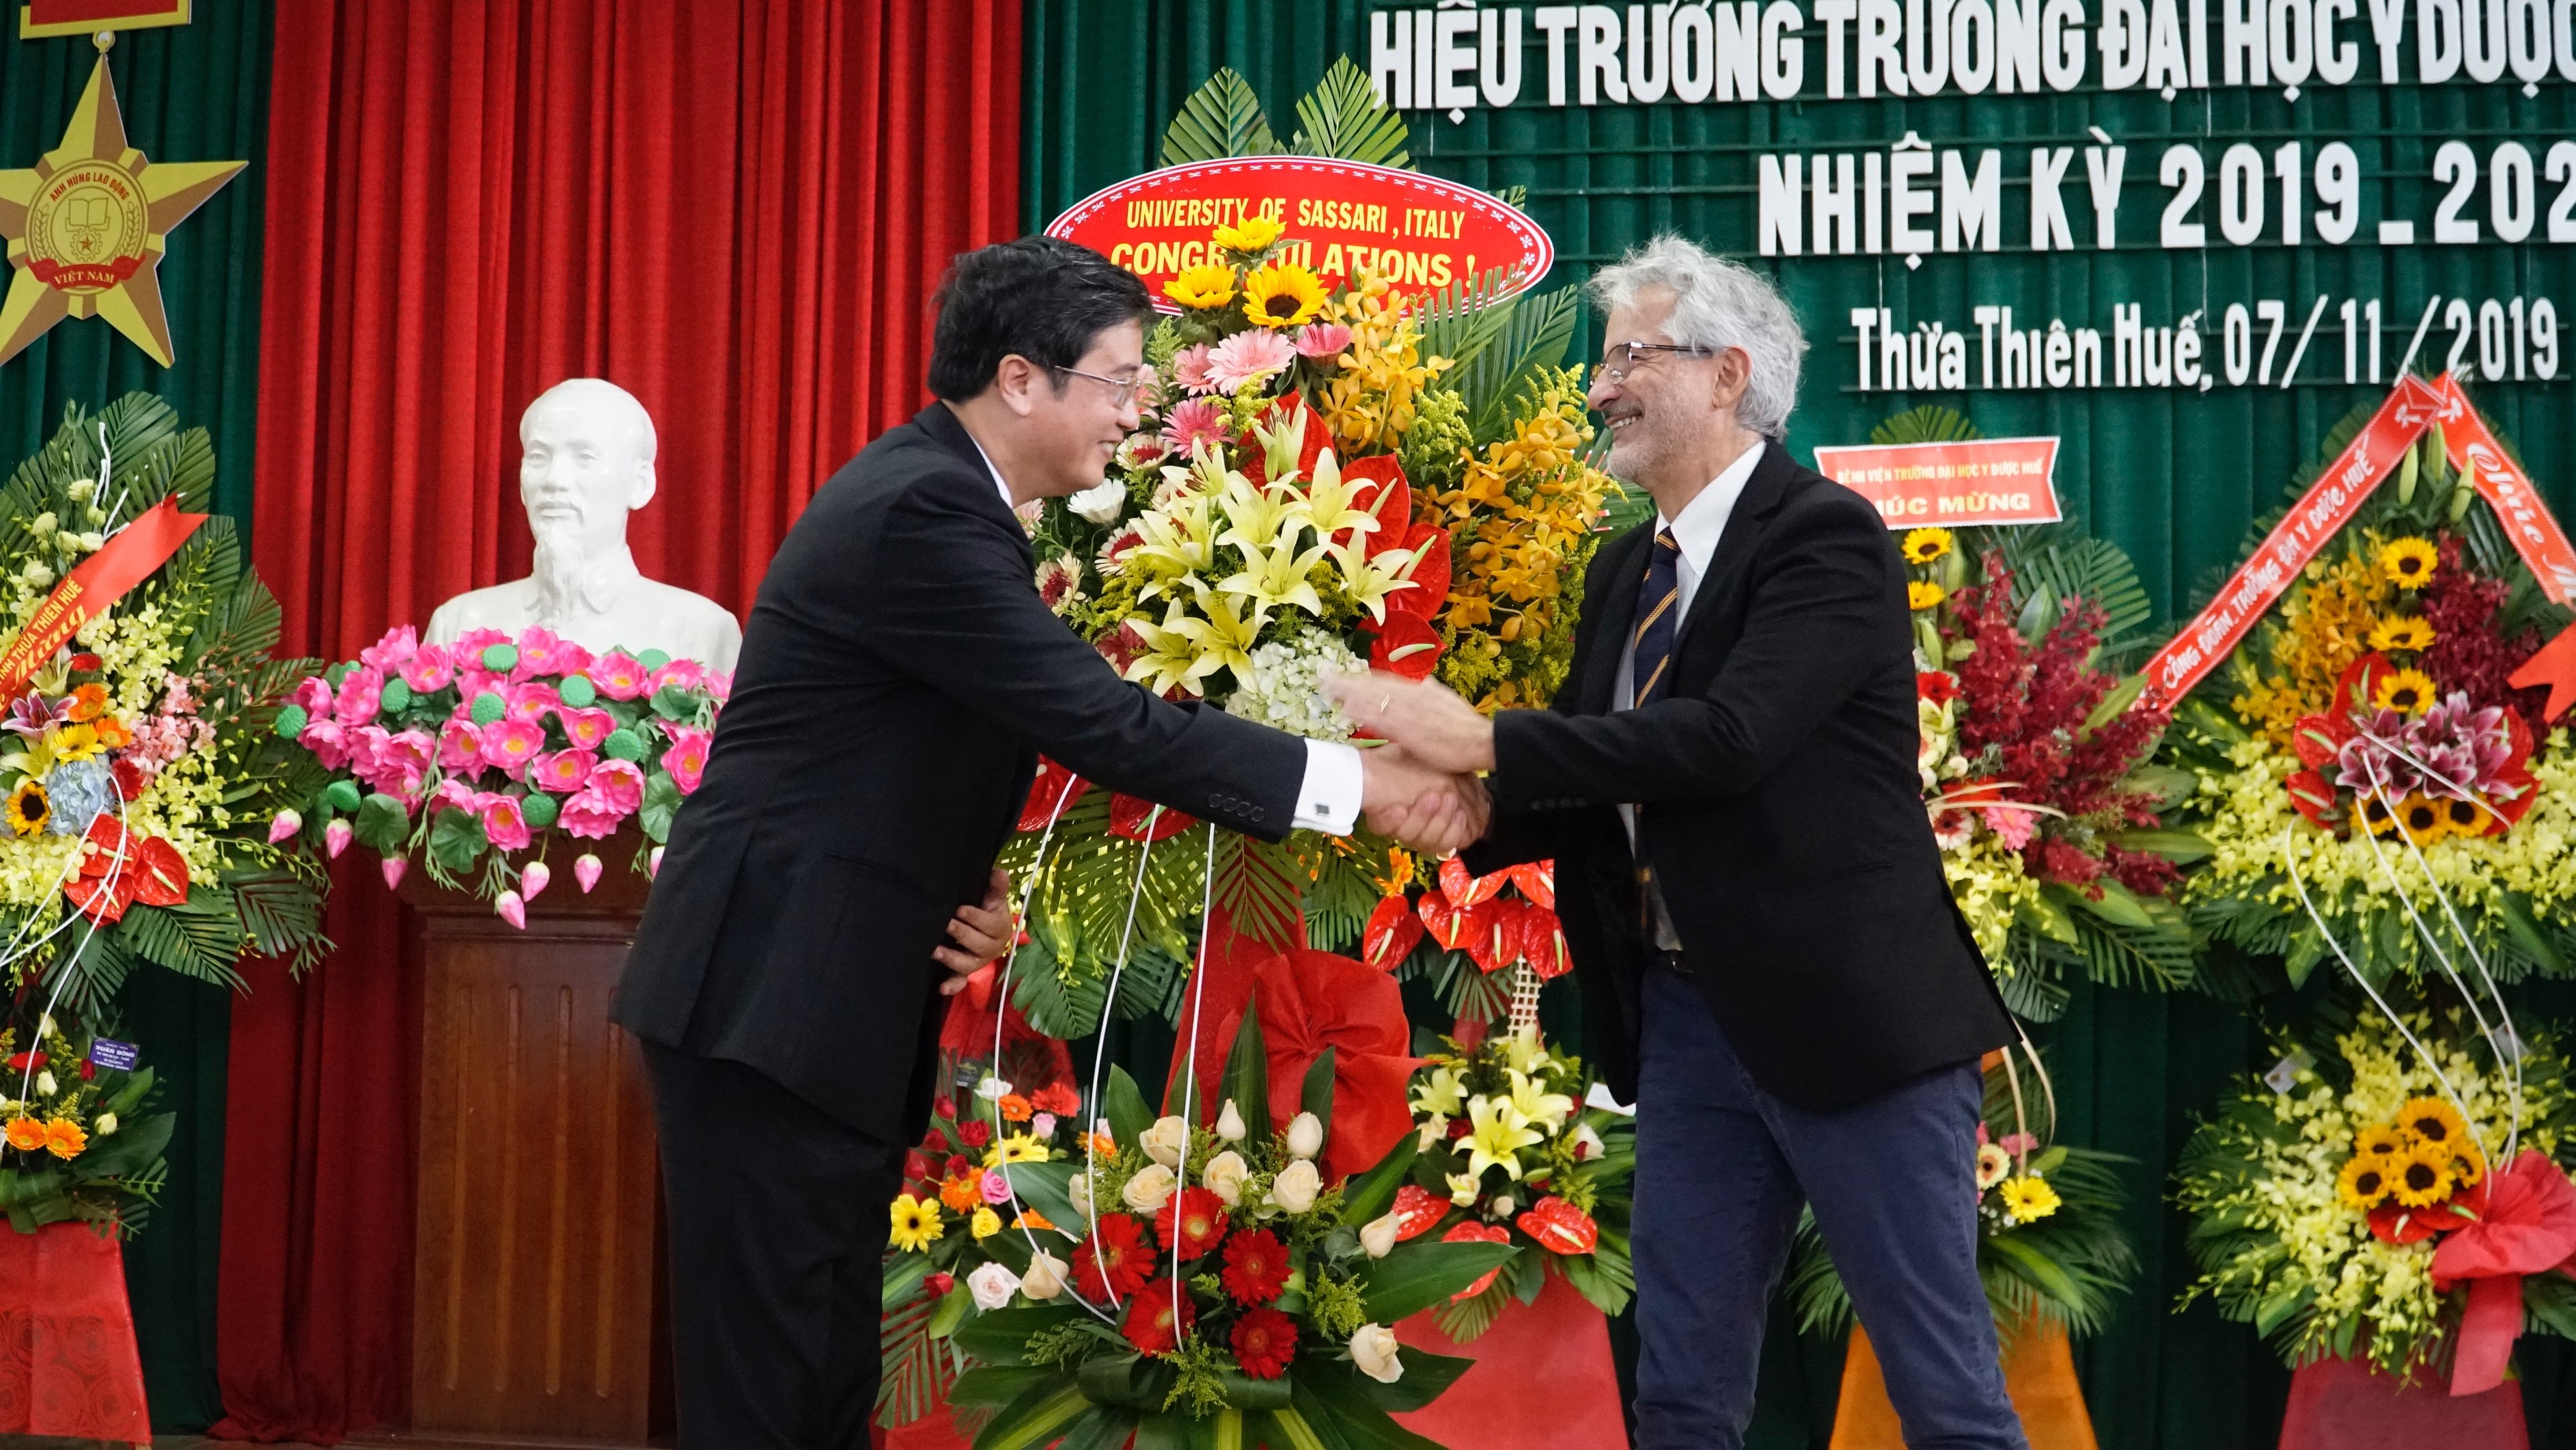 The decision on appointing the Rector of Hue University of Medicine and Pharmacy for the tenure 2019-2024 announced